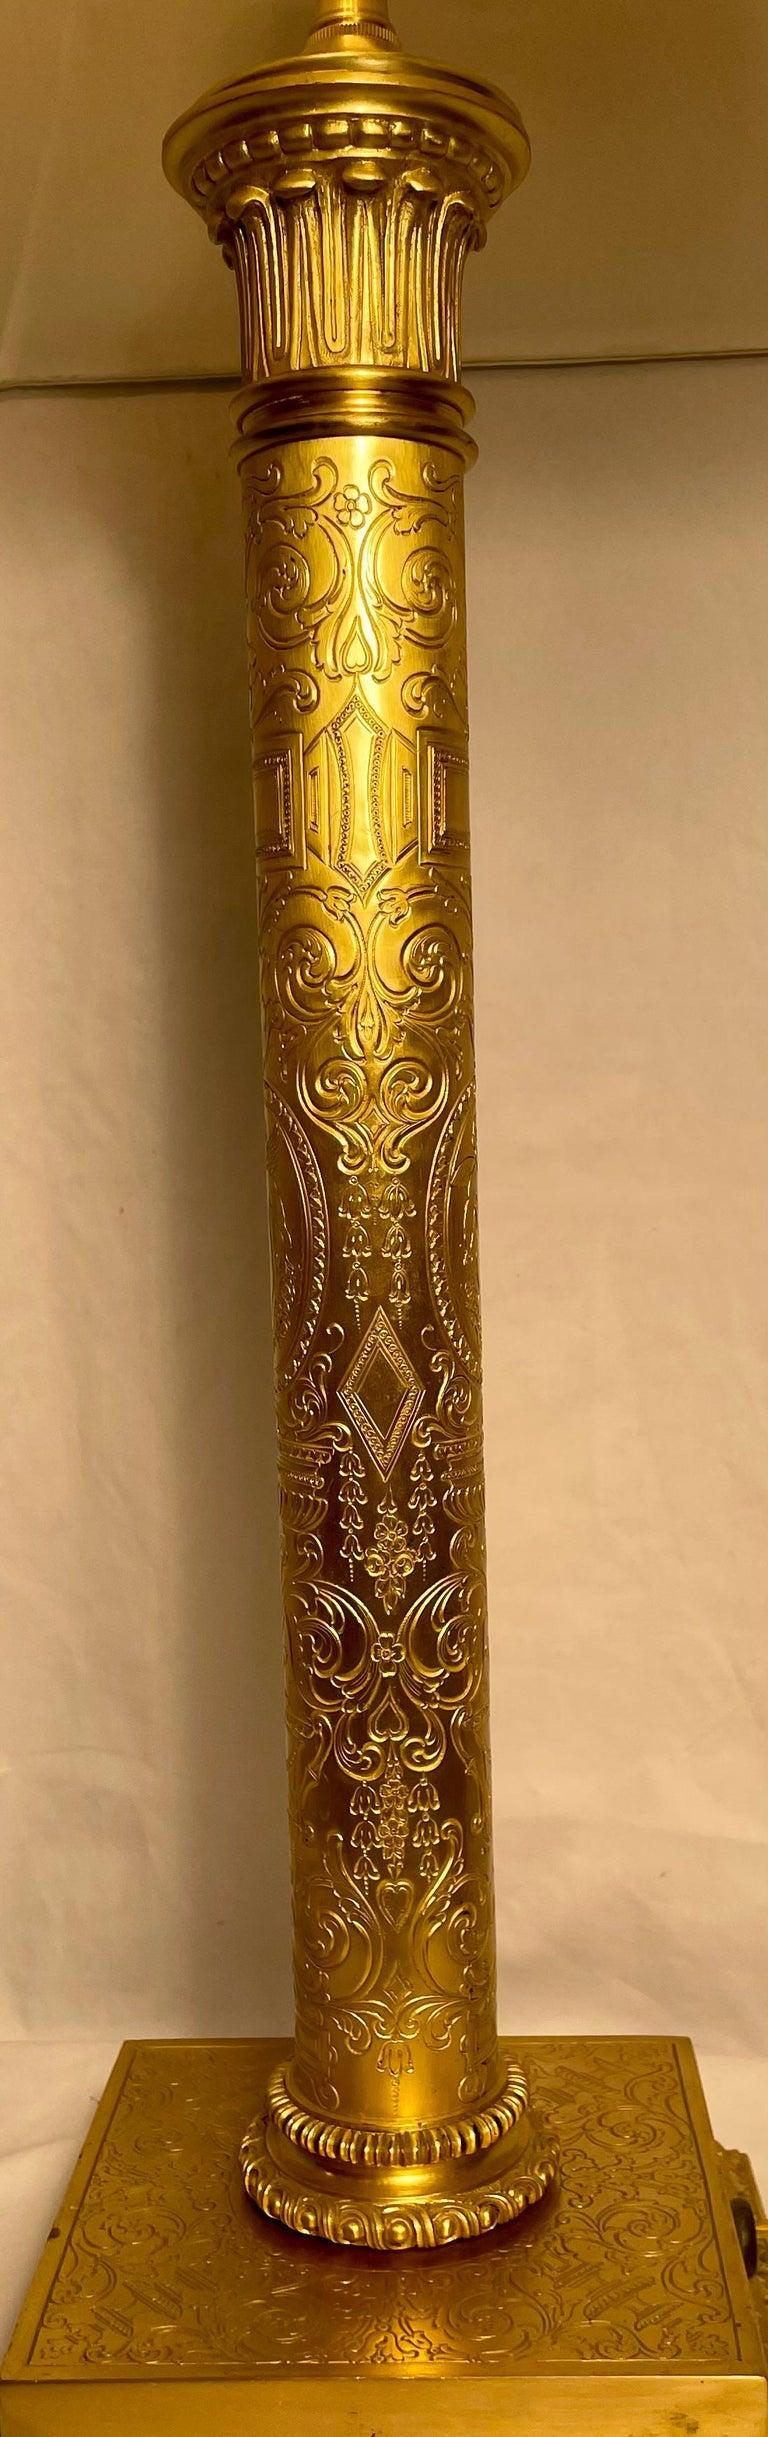 Antique Ormolu Lamp with Detailed Etching on Column by 